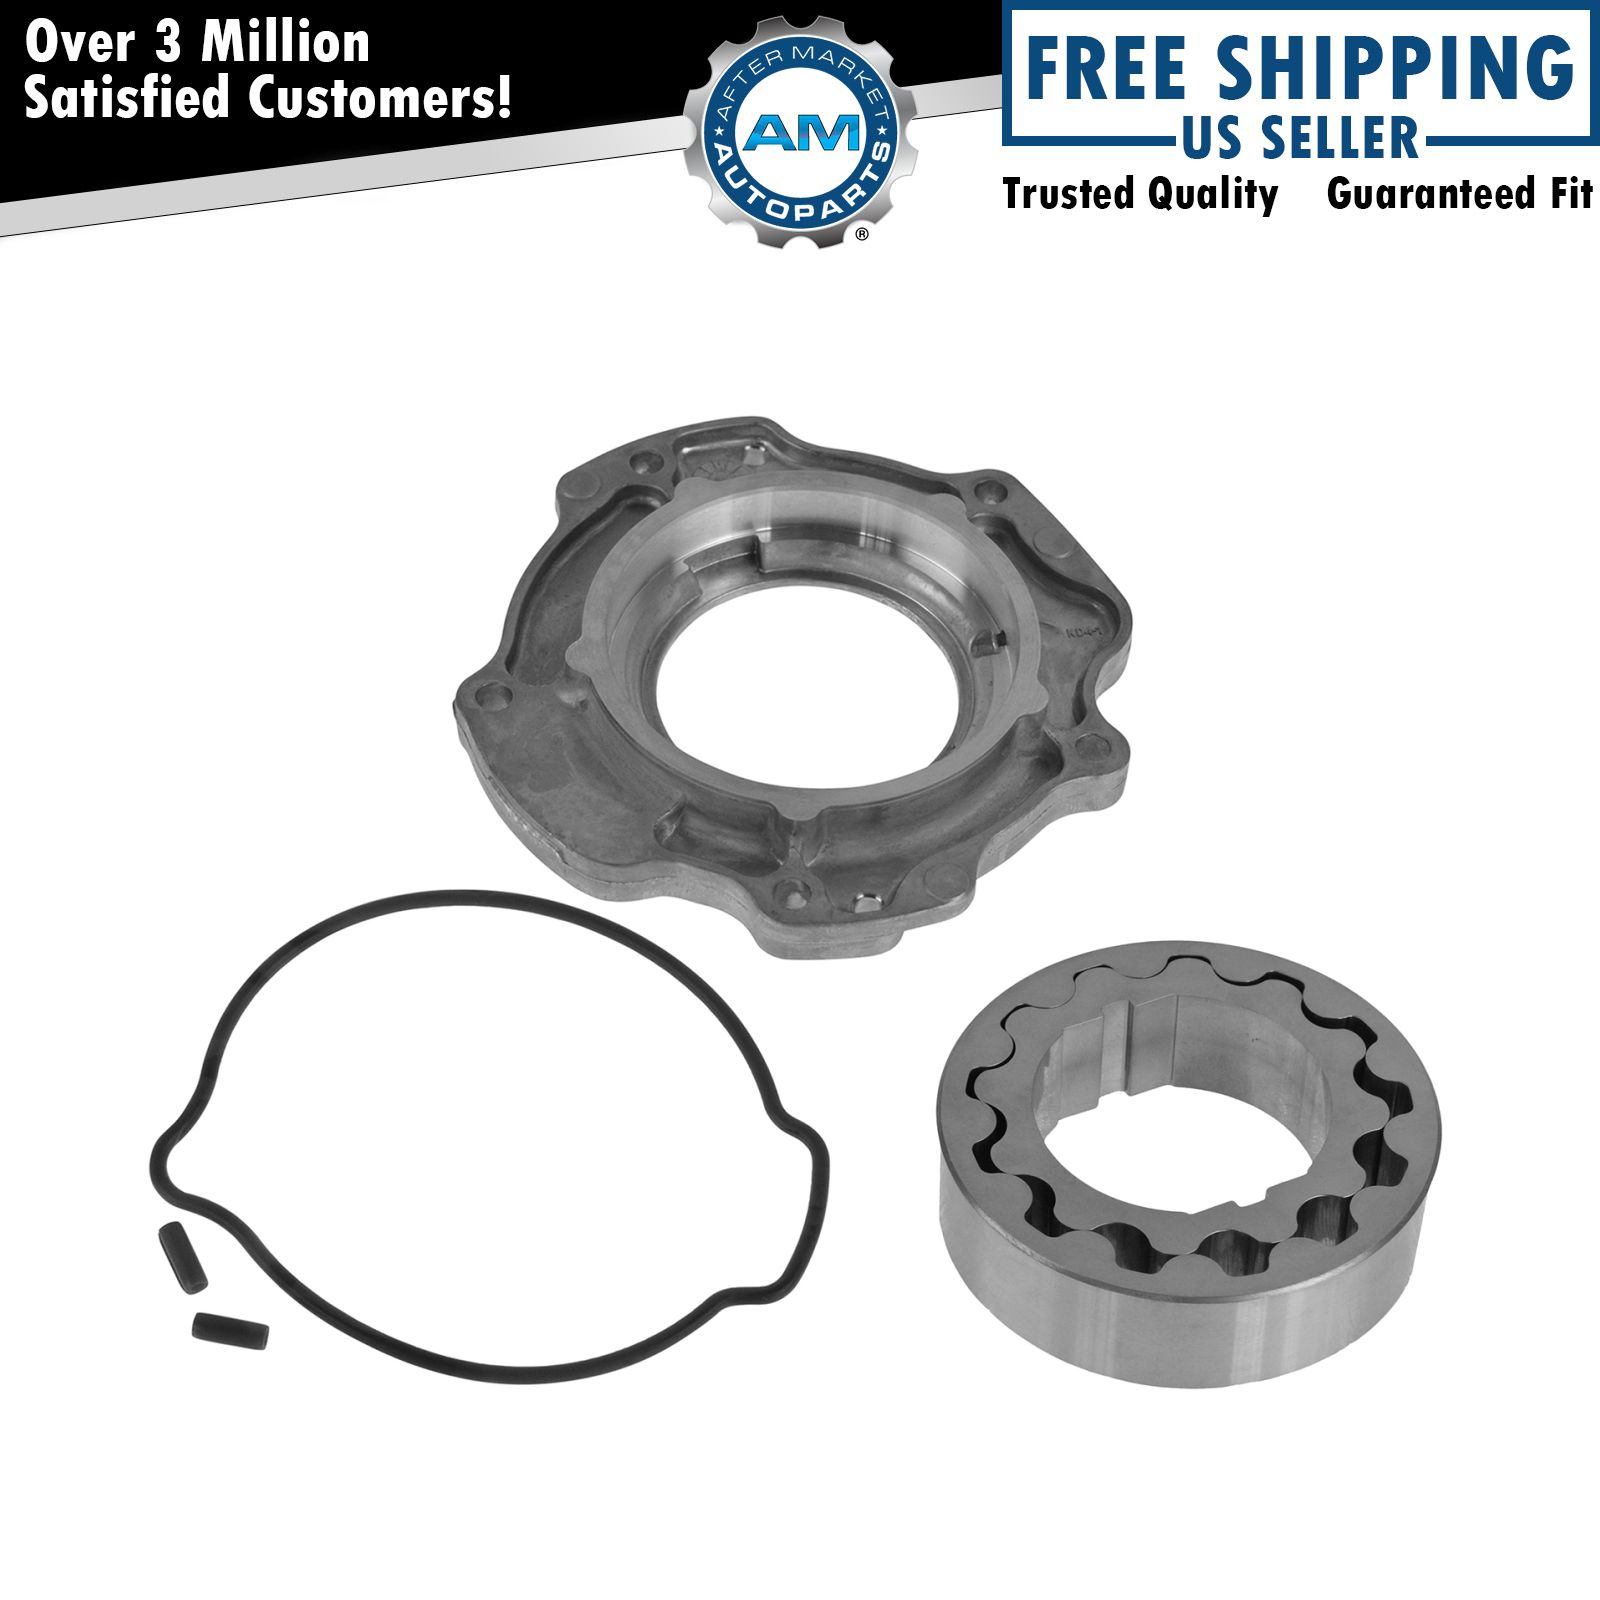 OEM Oil Pump w/ Front Cover Gasket Kit for Ford 6.0L Turbo Diesel New